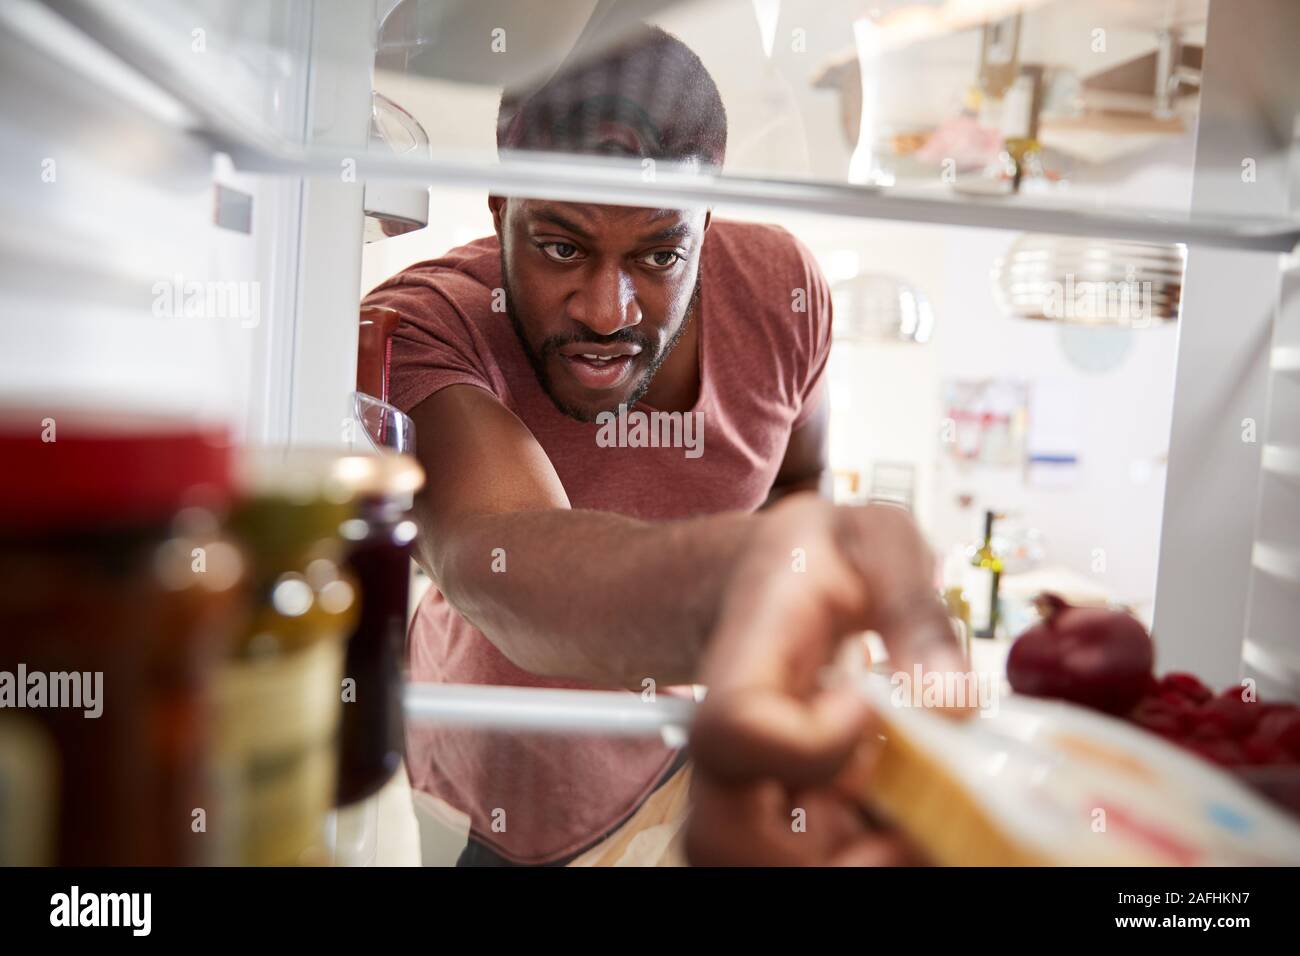 View Looking Out From Inside Of Refrigerator As Man Opens Door And Unpacks Shopping Bag Of Food Stock Photo